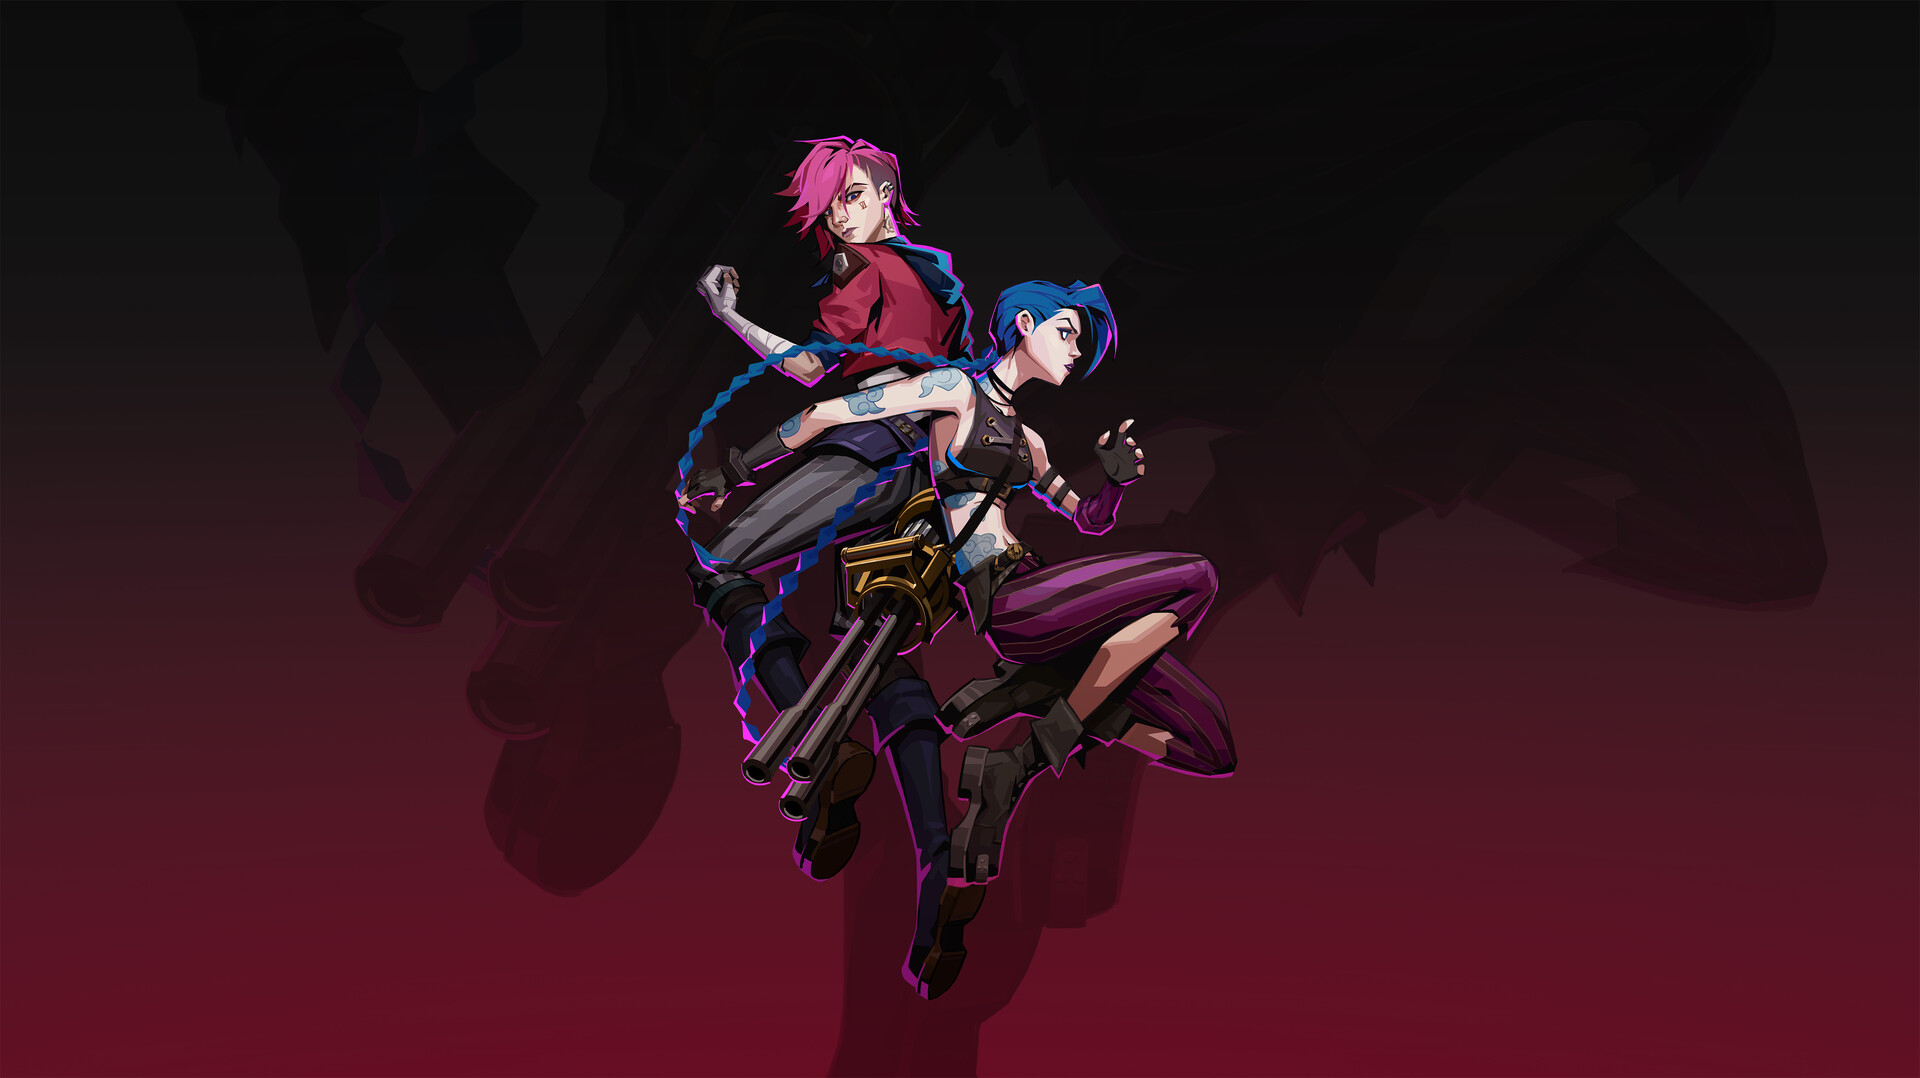 General 1920x1078 Jinx (League of Legends) League of Legends video game art illustration Arcane TV series weapon blue hair pink hair tattoo video game characters braids